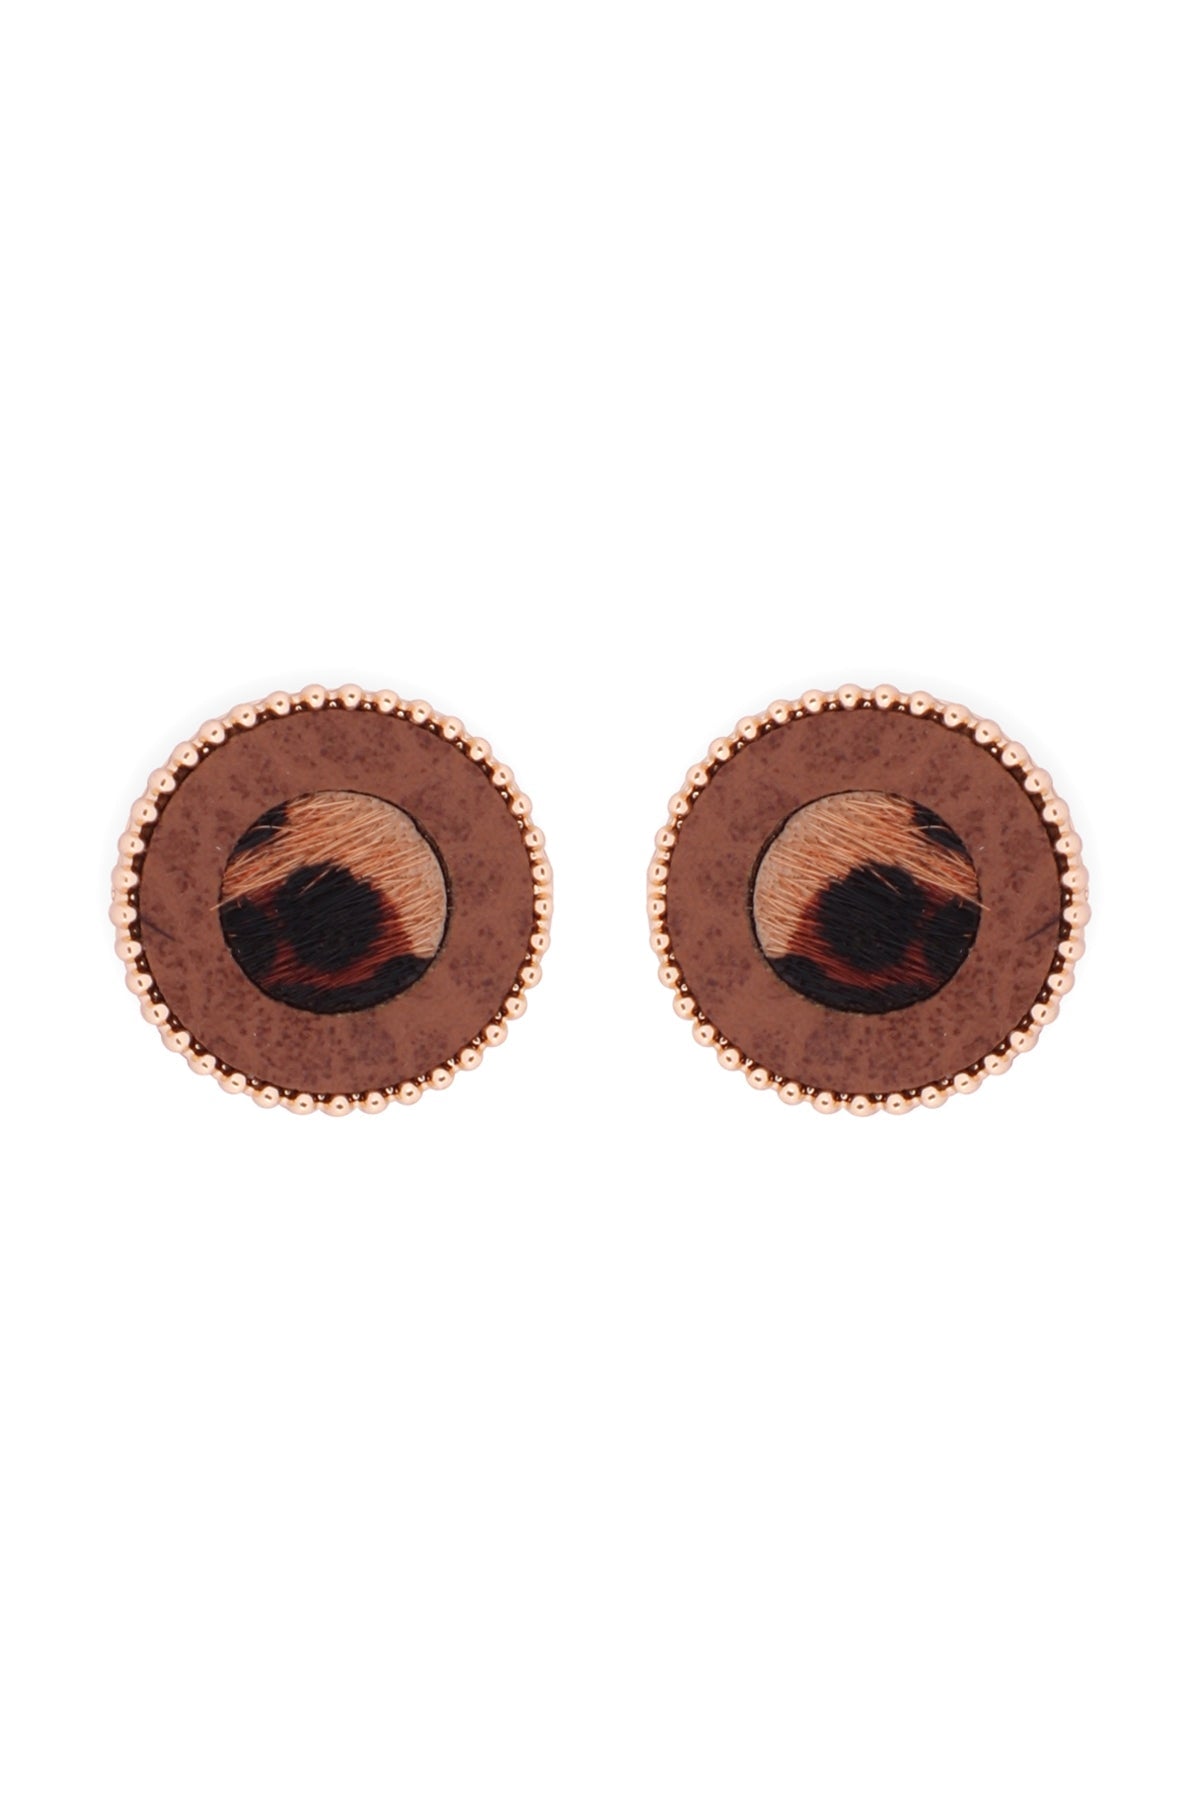 ANIMAL PRINT LEATHER ROUND TWO TONE POST EARRINGS